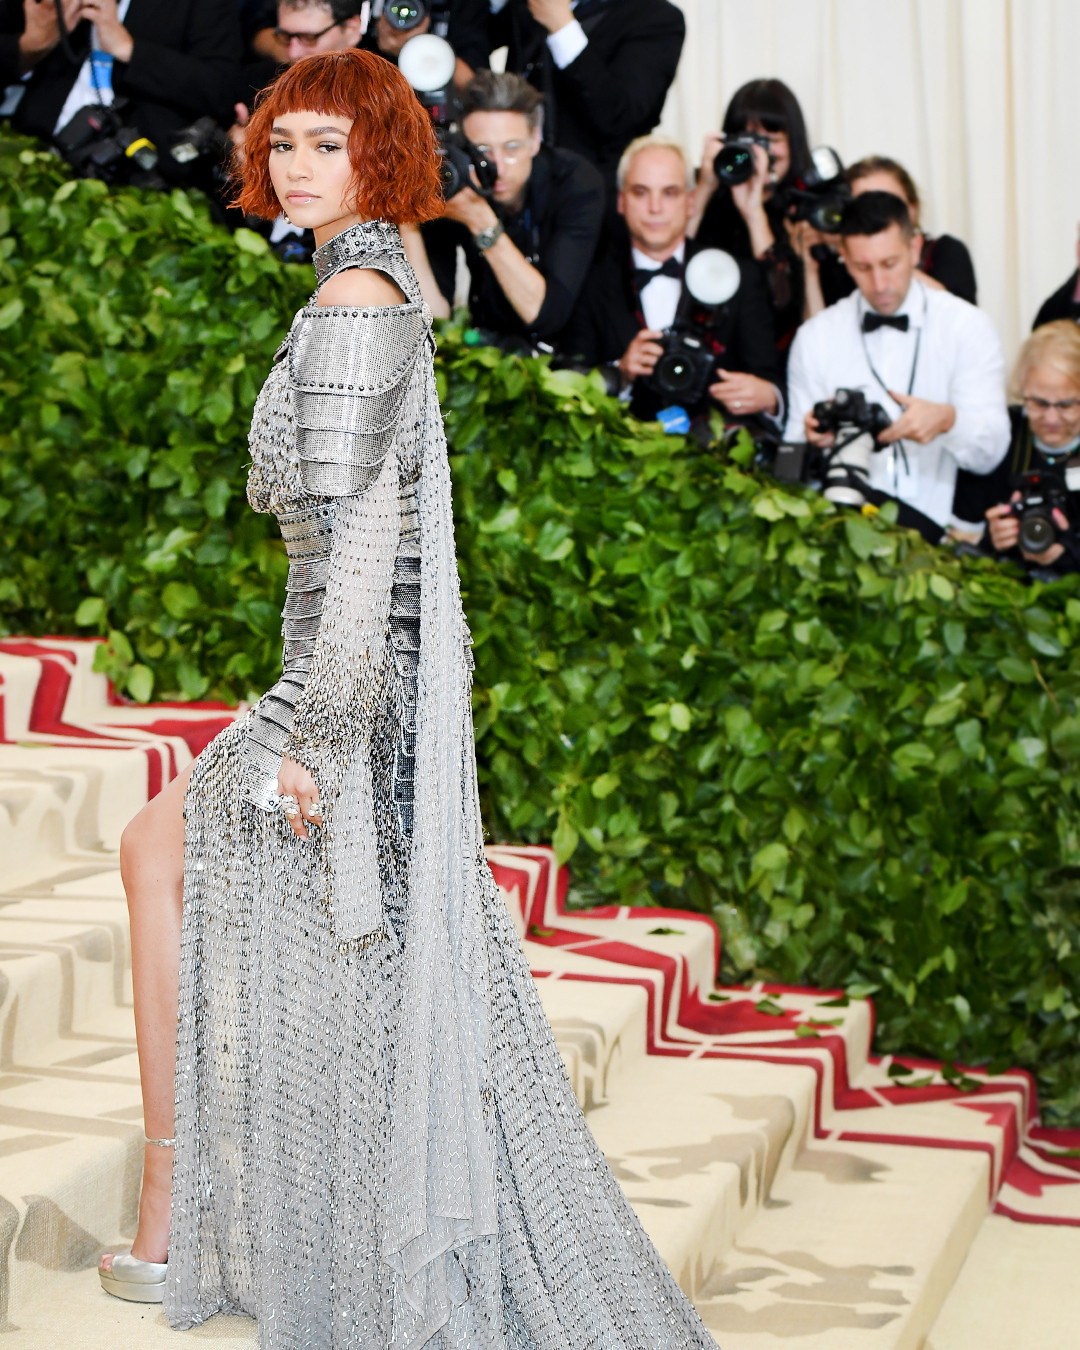 Zendaya Materializes Girl Power With Homage to Joan of Arc at Met Gala ...